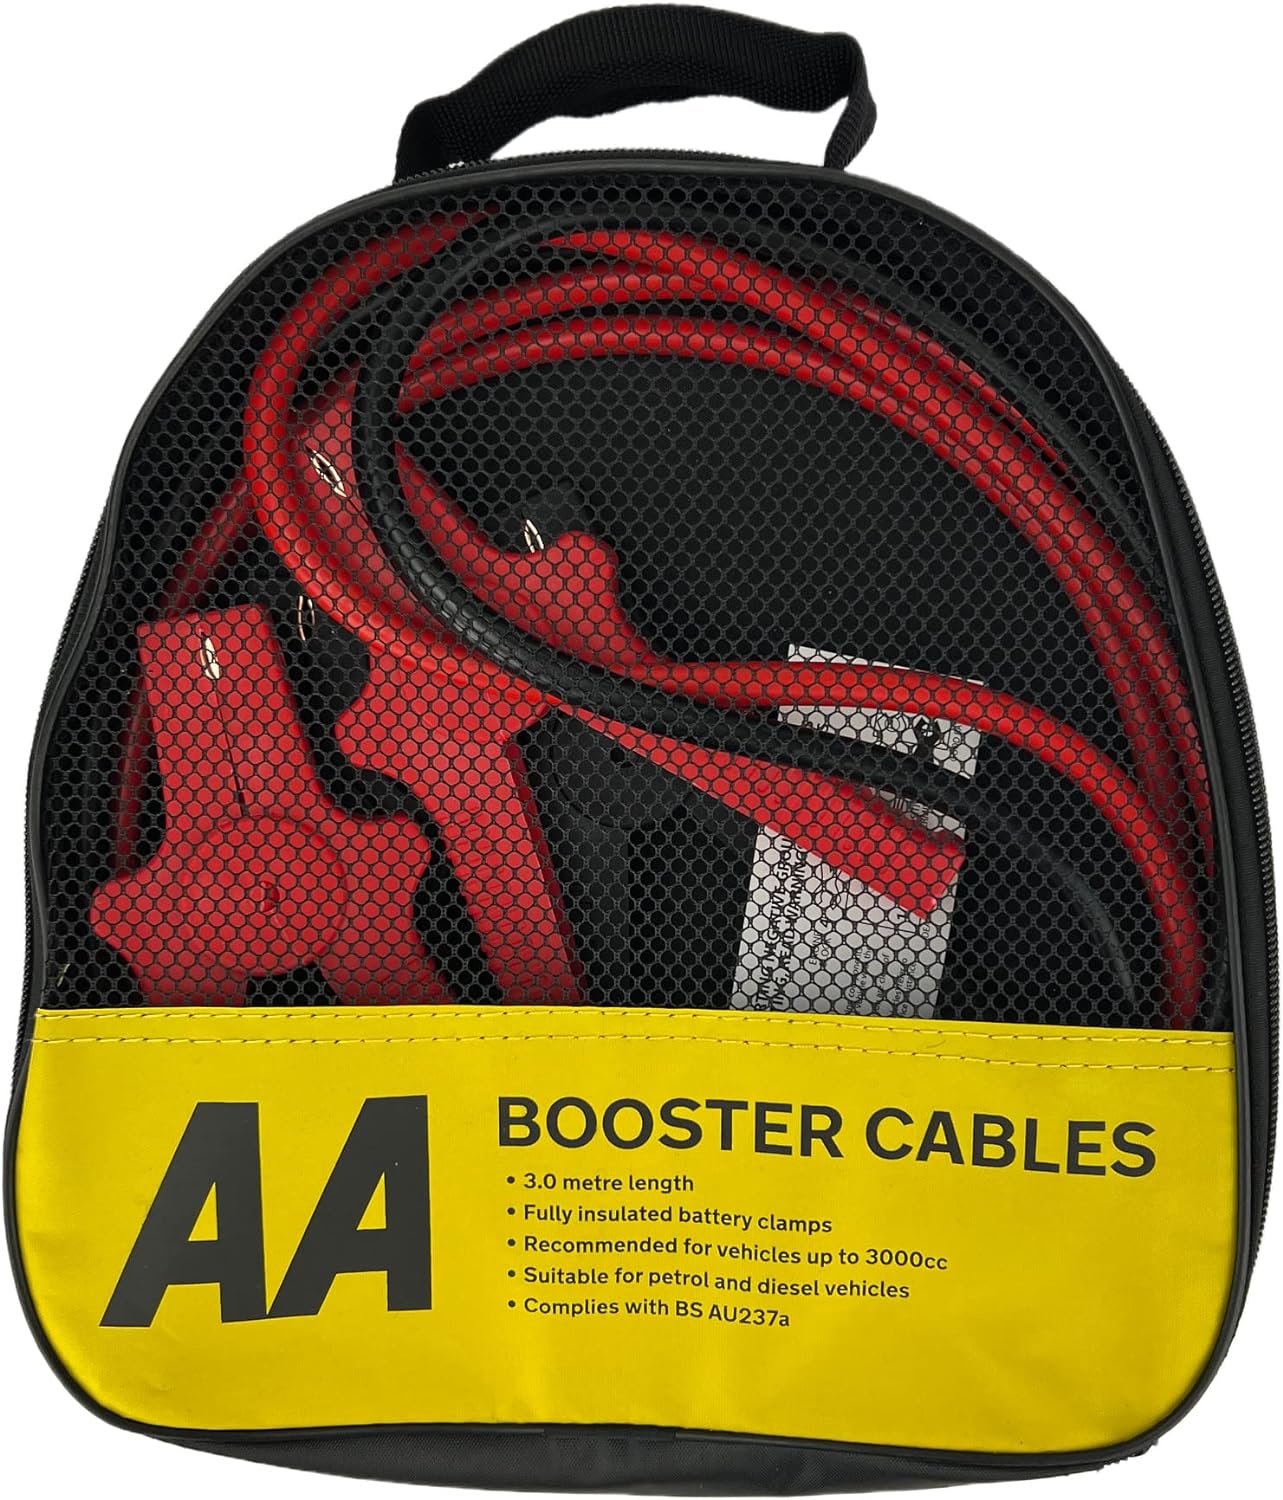 AA Insulated Booster Cables/Jump Leads AA4550-550U